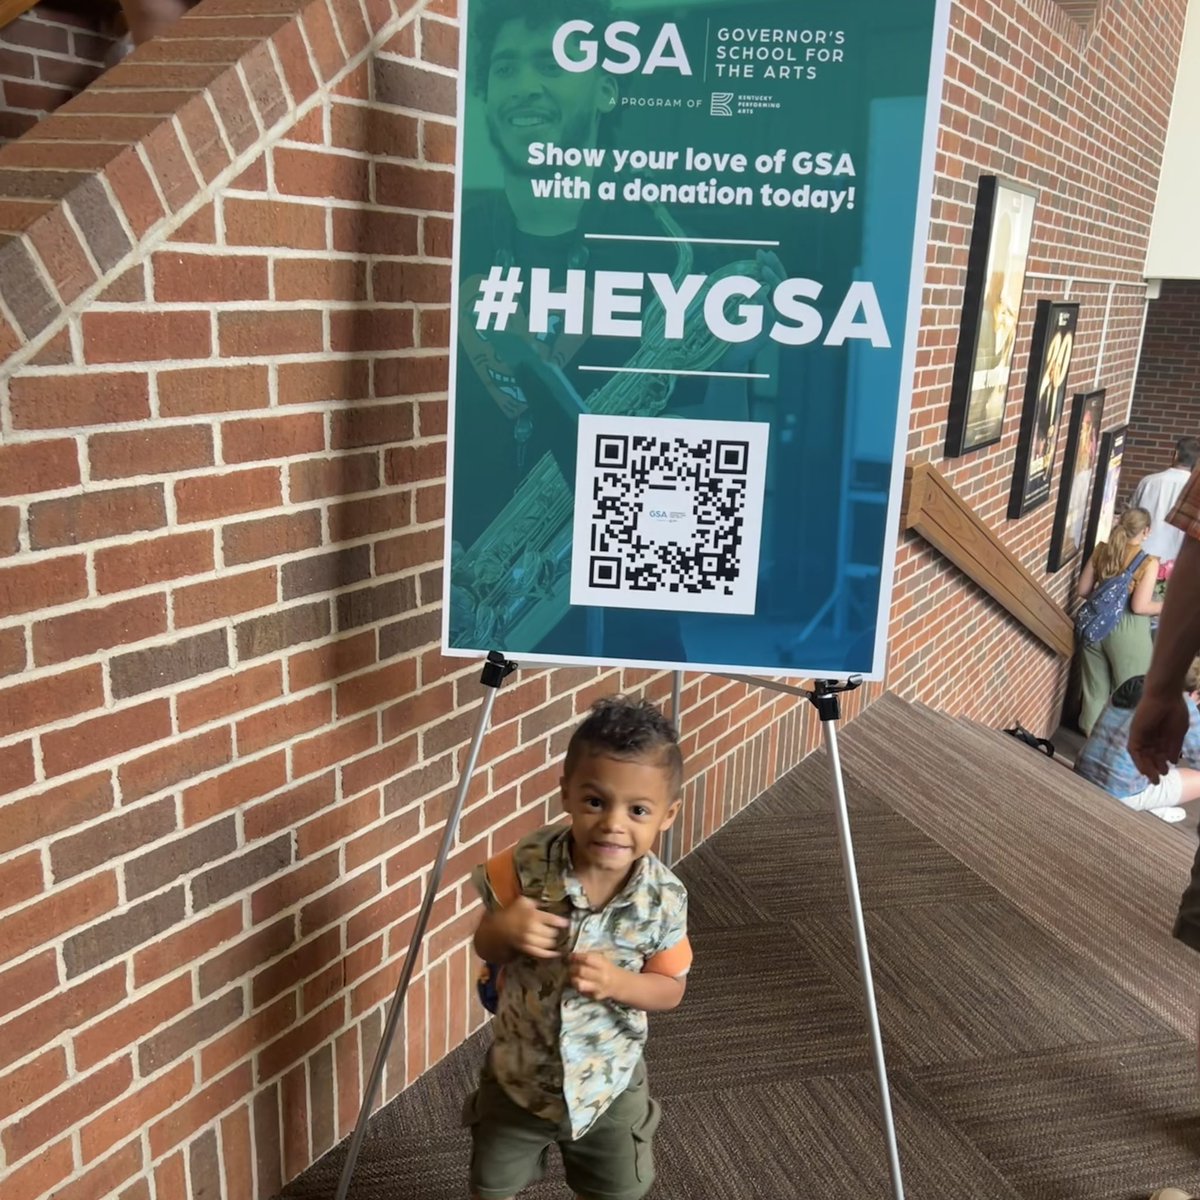 A joy to experience final performances/presentations for @KYGSA Session 2 today! This cutie joined me as an awesome audience member too. #MotherSonDay